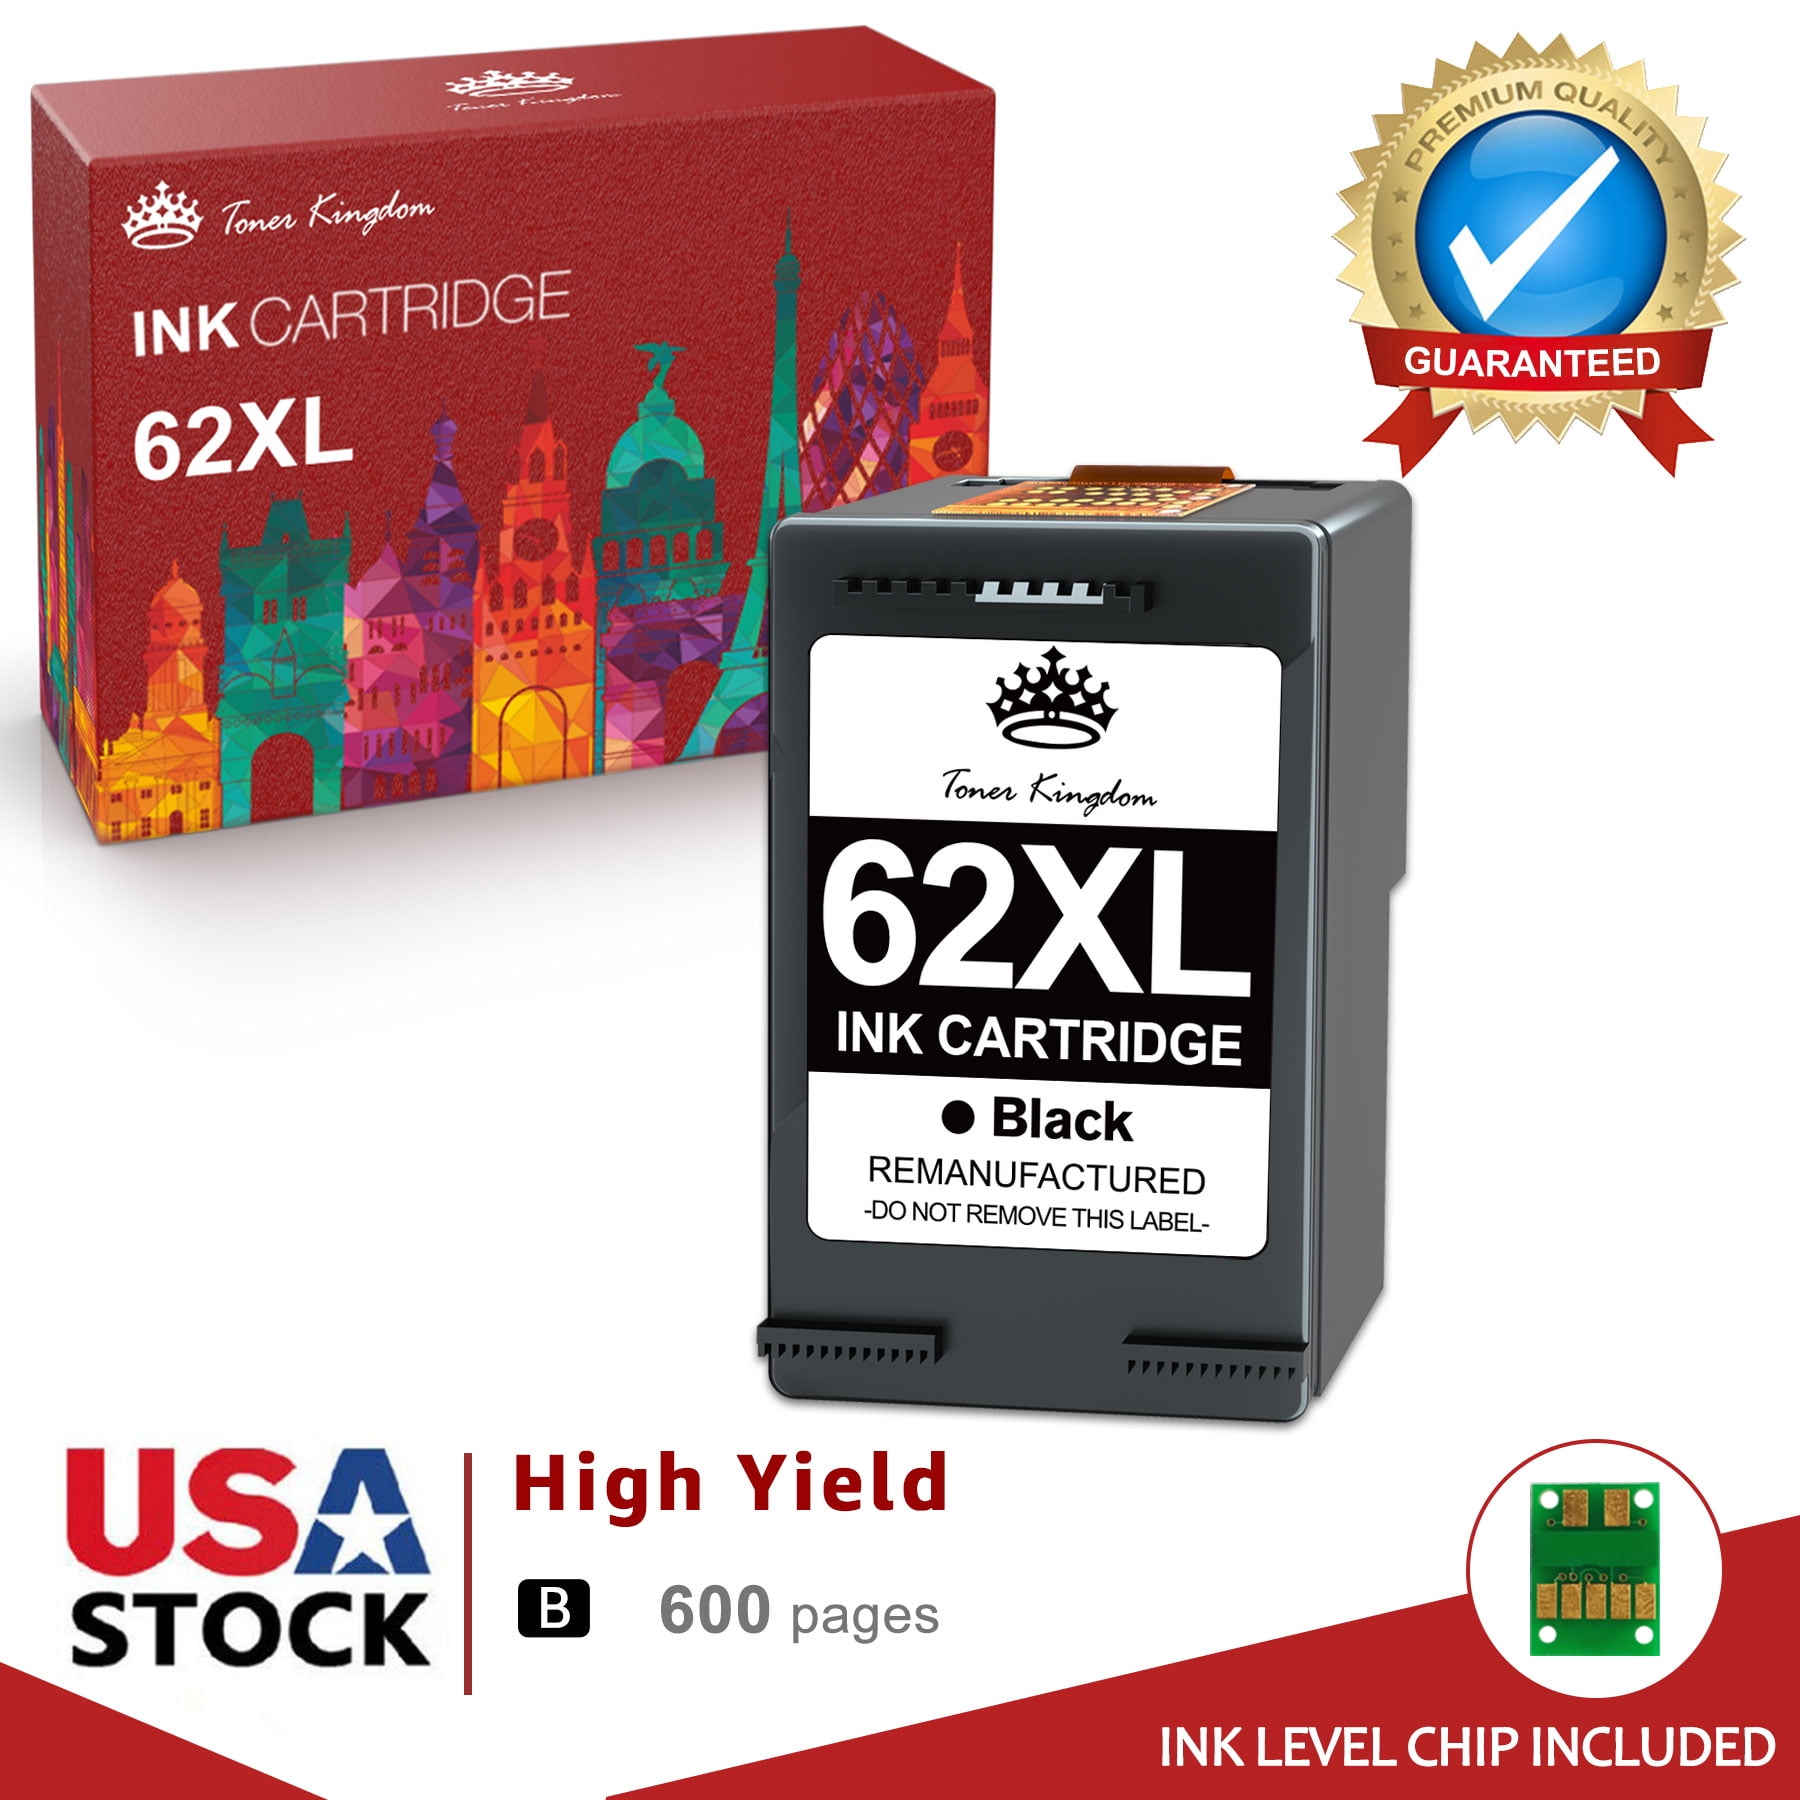 HP 62 Tri-color Ink Cartridge | Works with HP ENVY 5540, 5640, 5660, 7640  Series, HP OfficeJet 5740, 8040 Series, HP OfficeJet Mobile 200, 250 Series